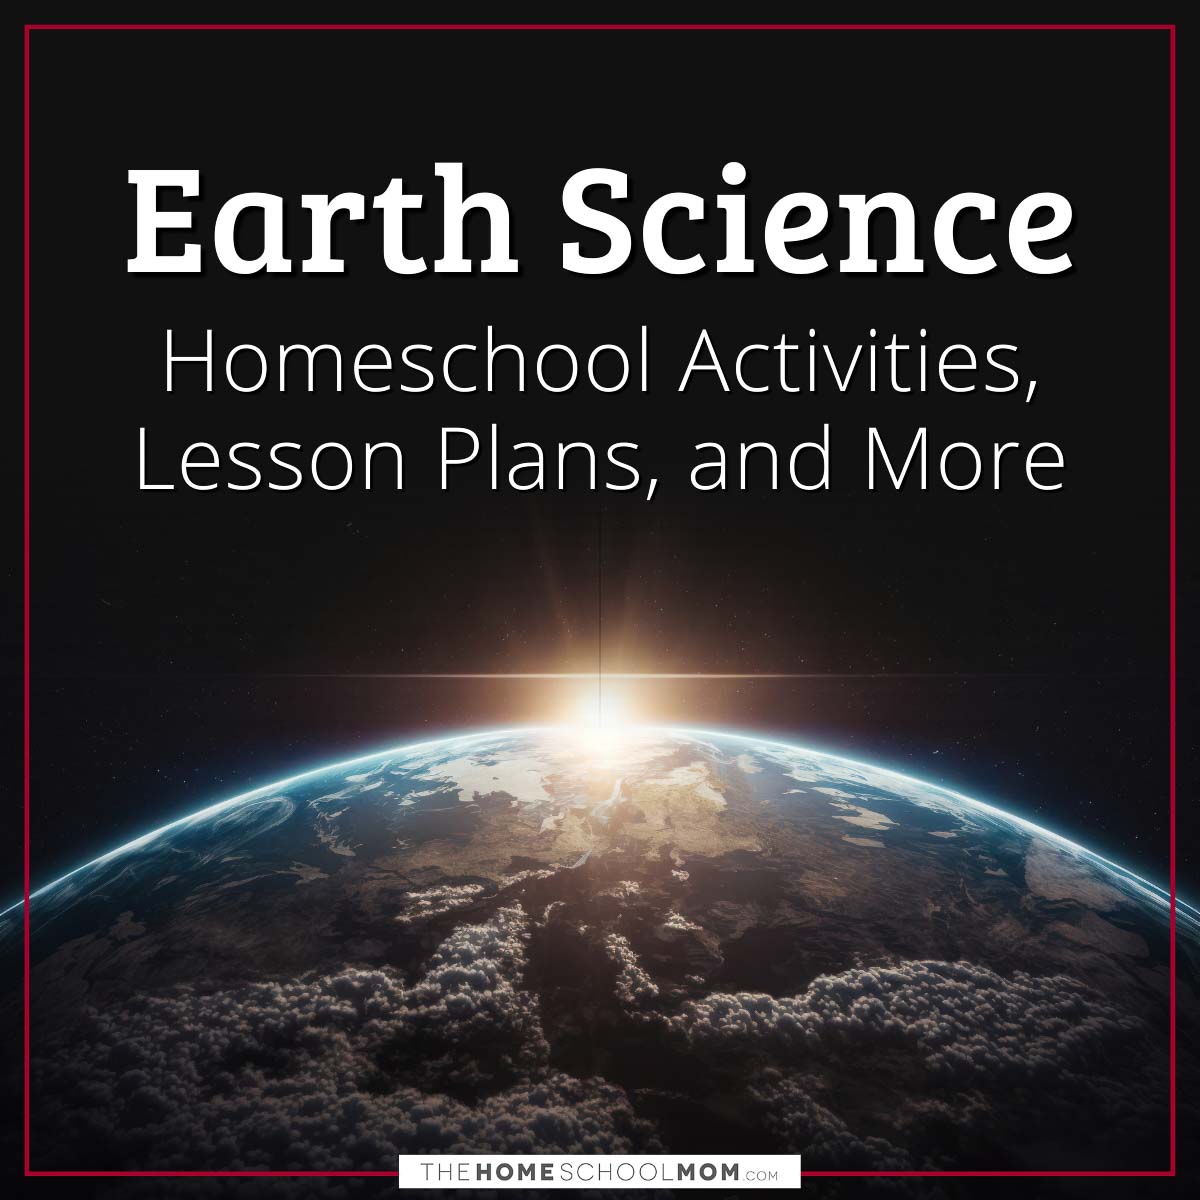 Earth Science Homeschool Activities, Lesson Plans, and More.